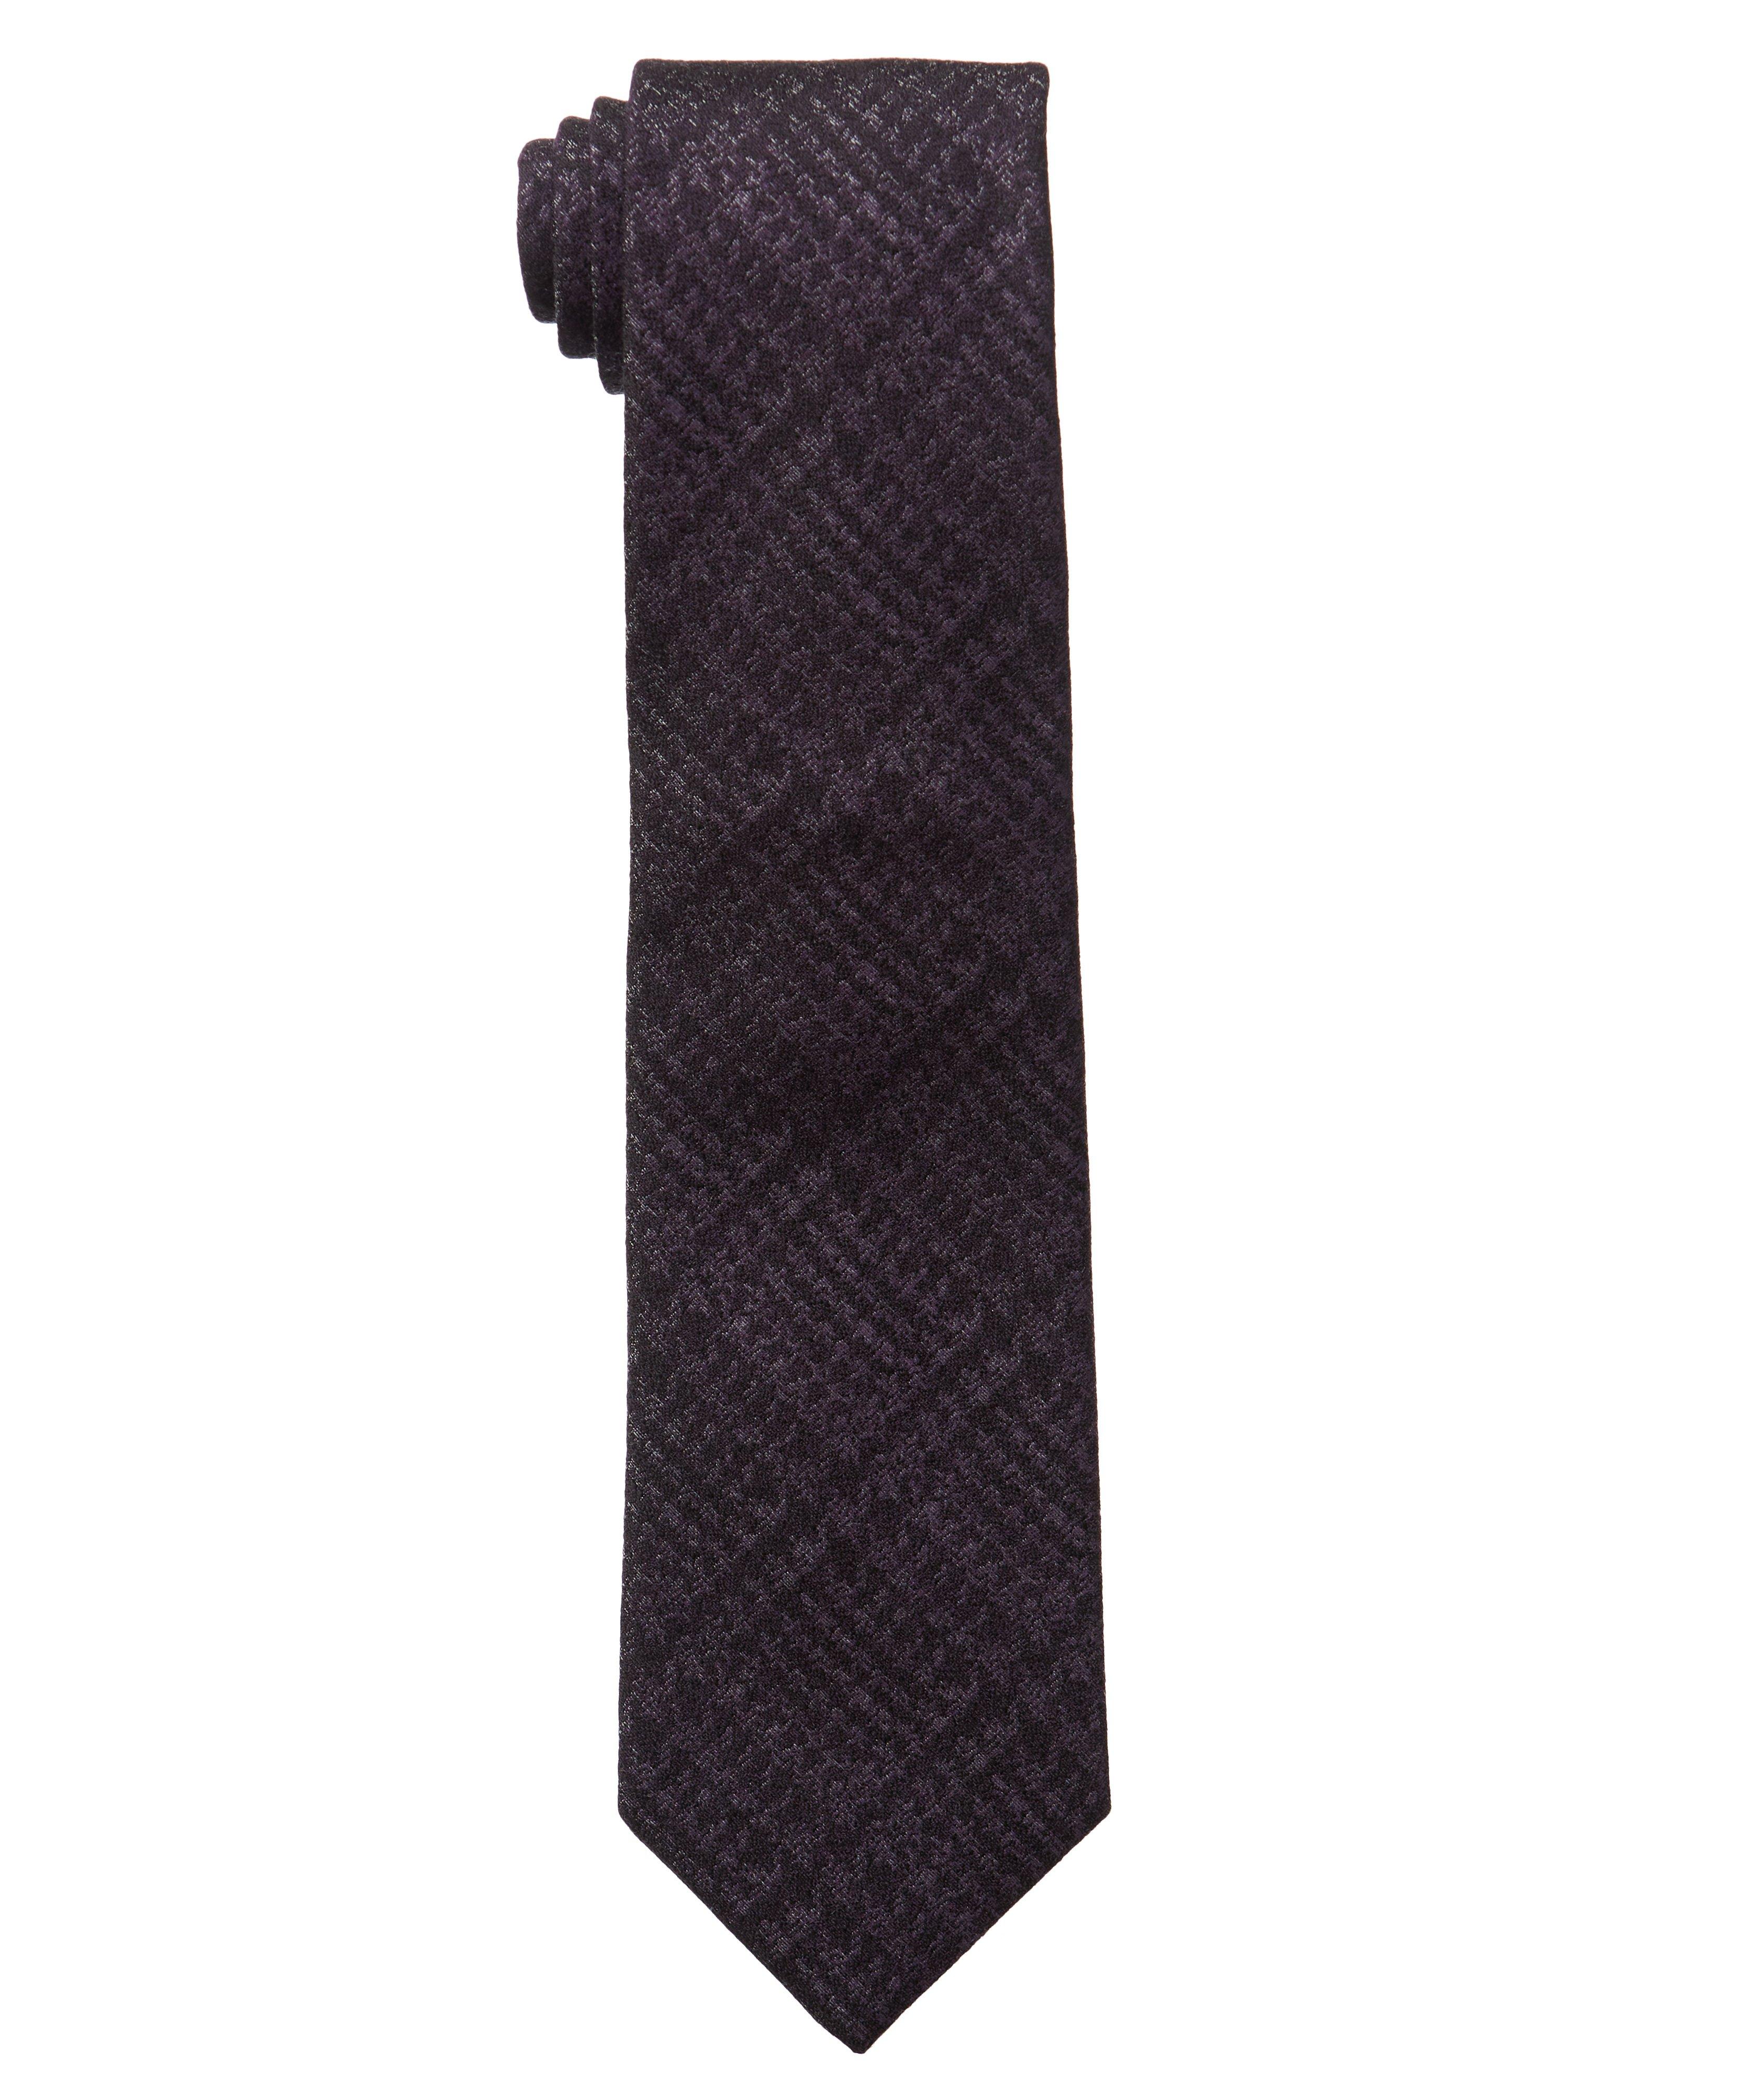 Checked Wool-Silk Tie image 0